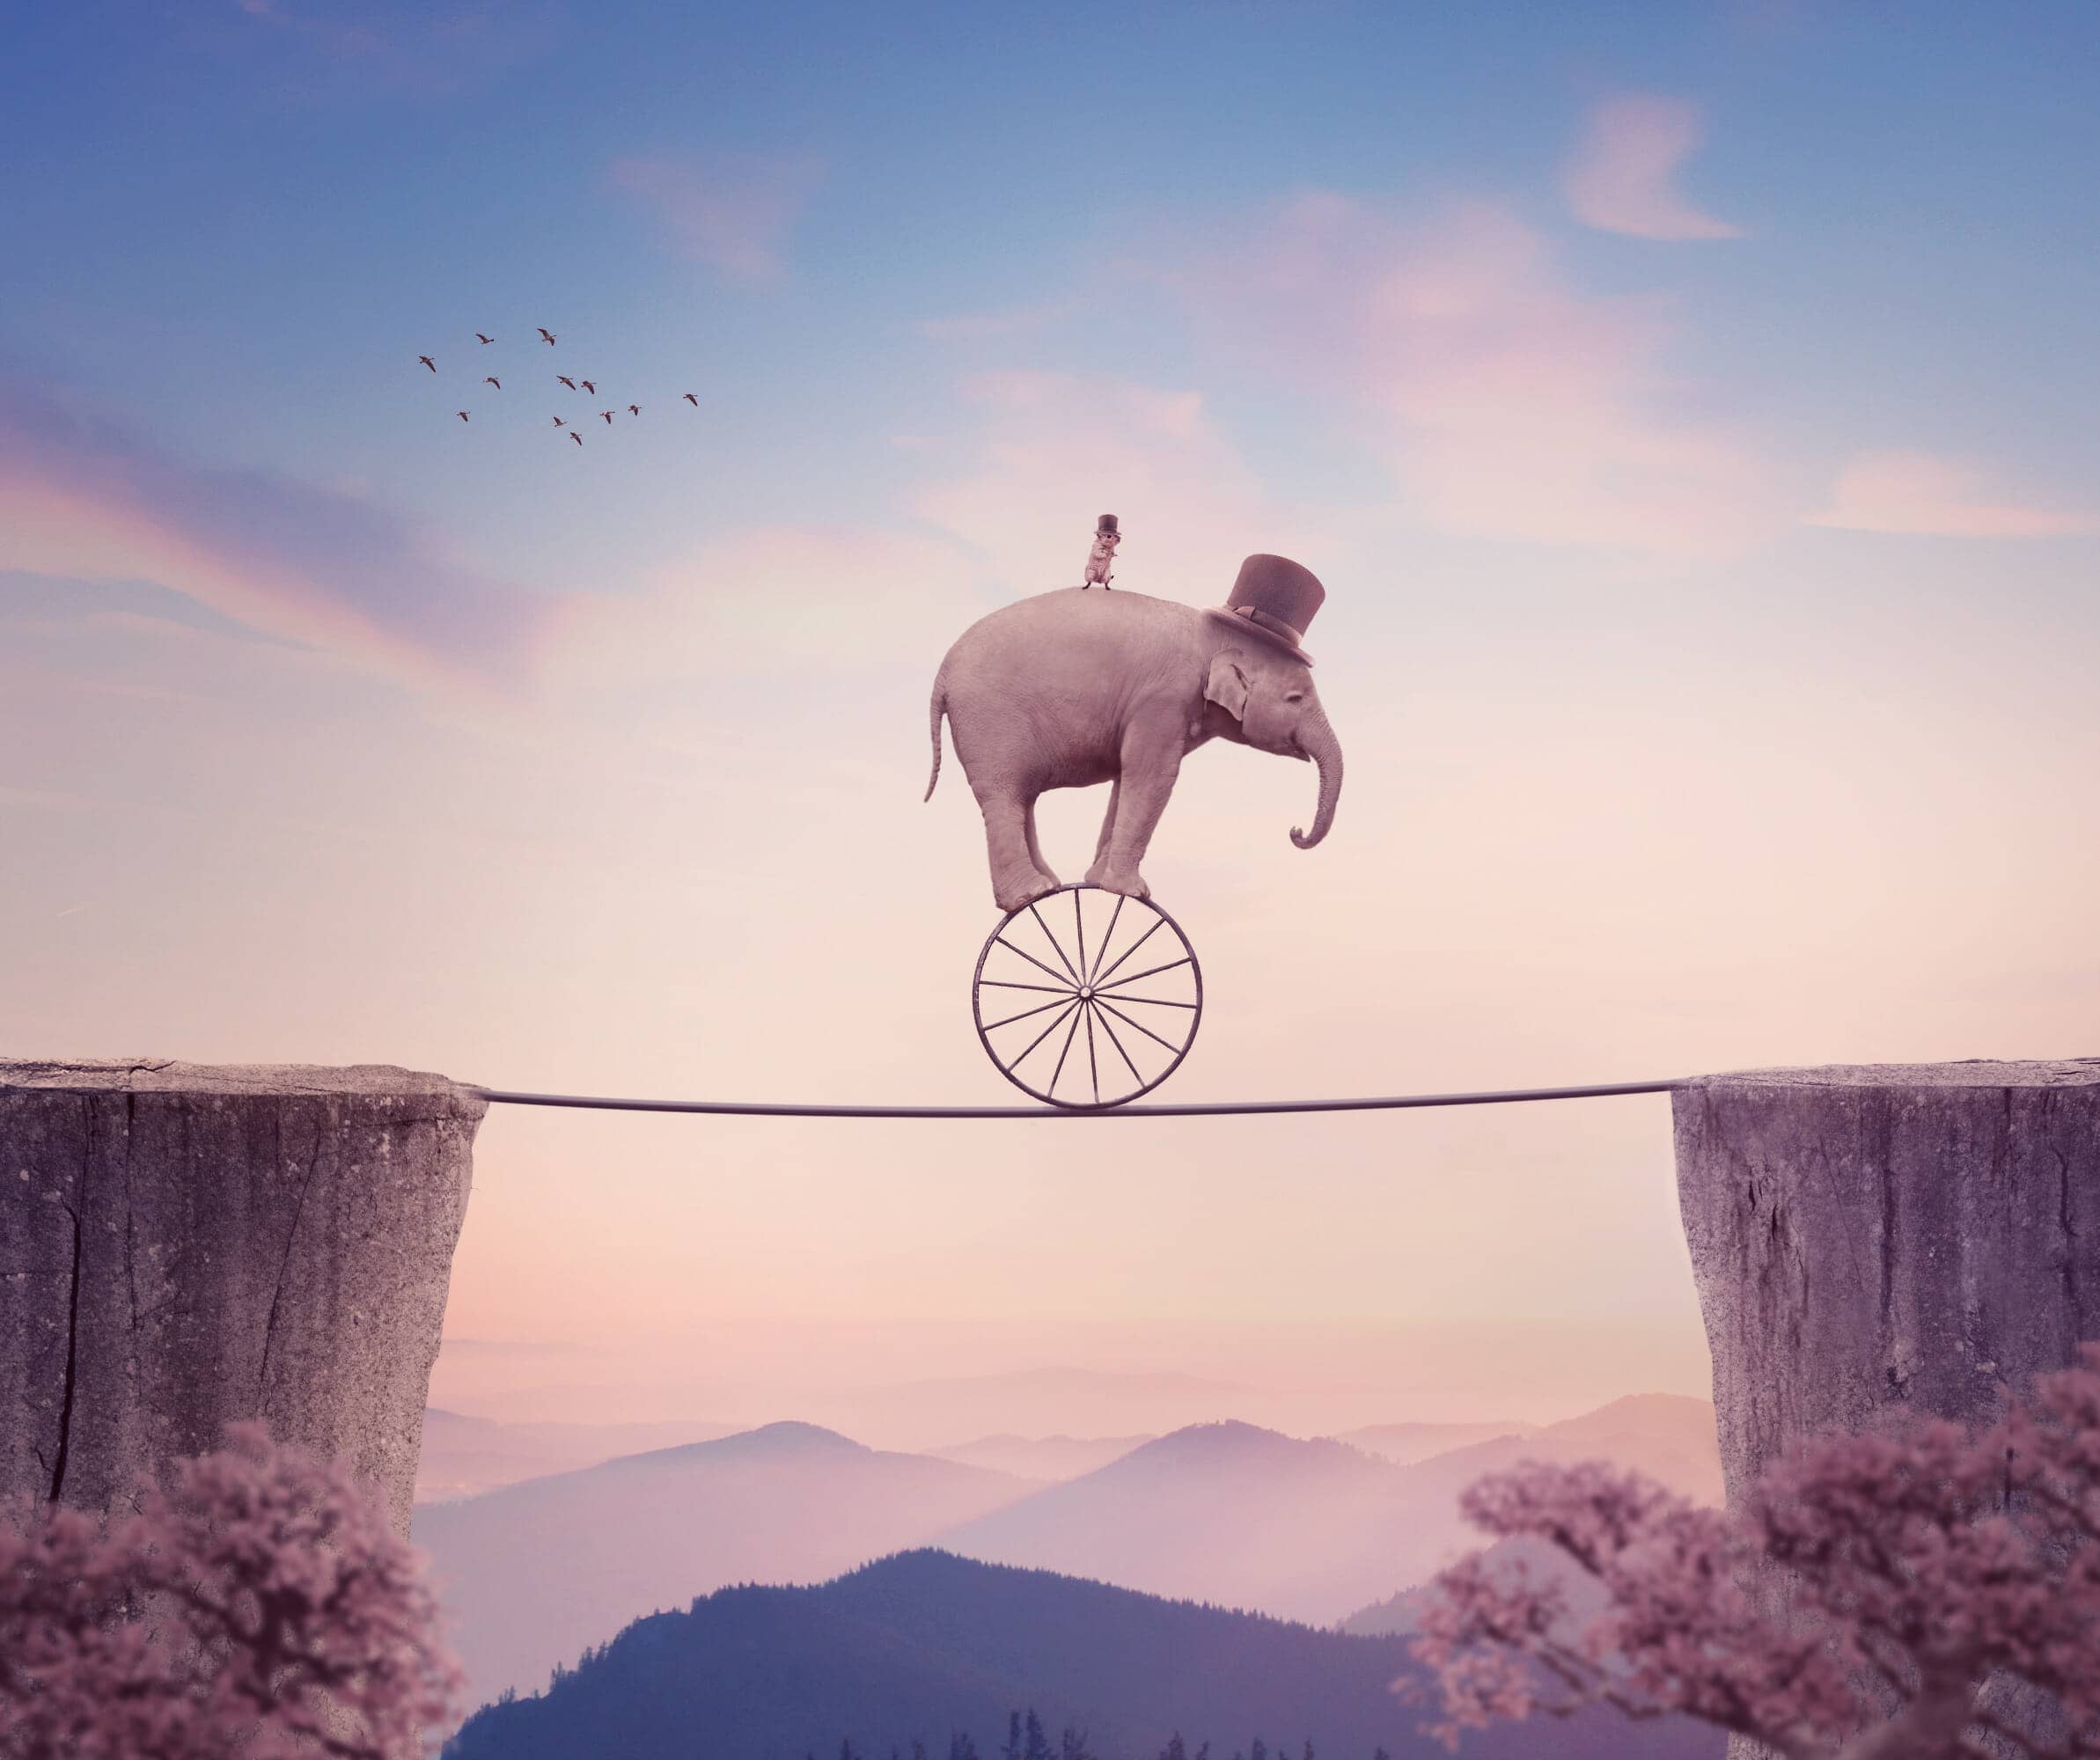 How to Create a Surreal Elephant Photo Manipulation with Adobe Photoshop